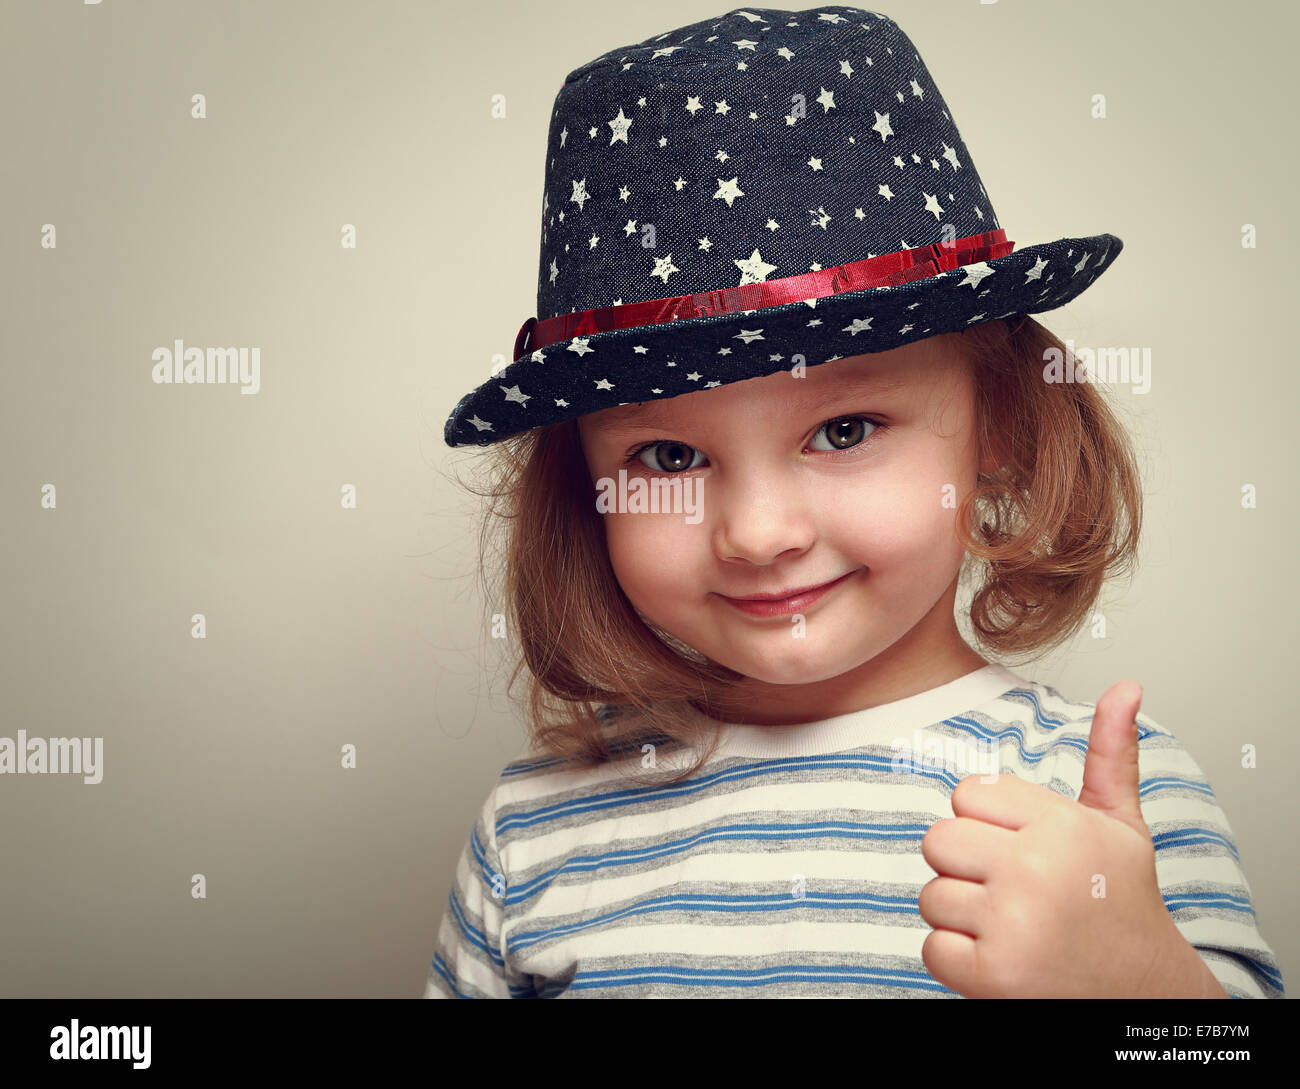 Smiling kid girl in blue hat showing thumb up sign. Closeup Stock Photo